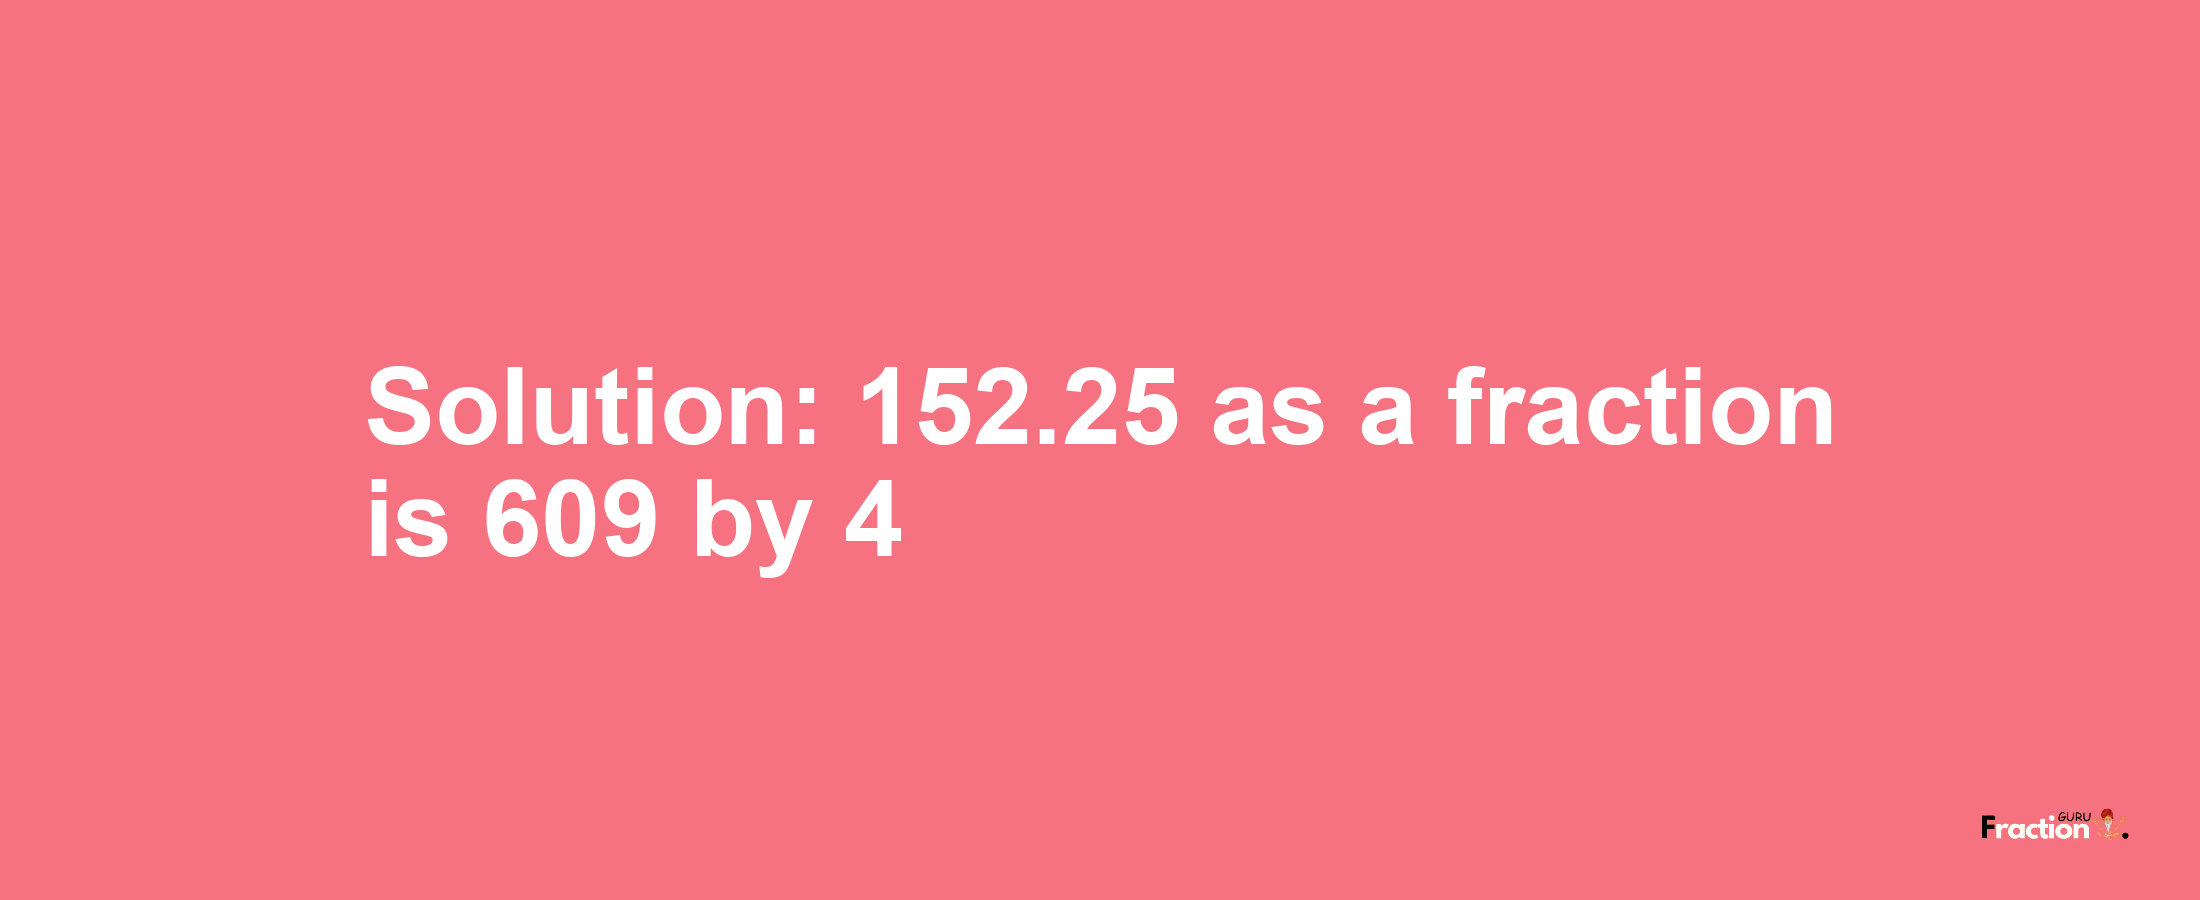 Solution:152.25 as a fraction is 609/4